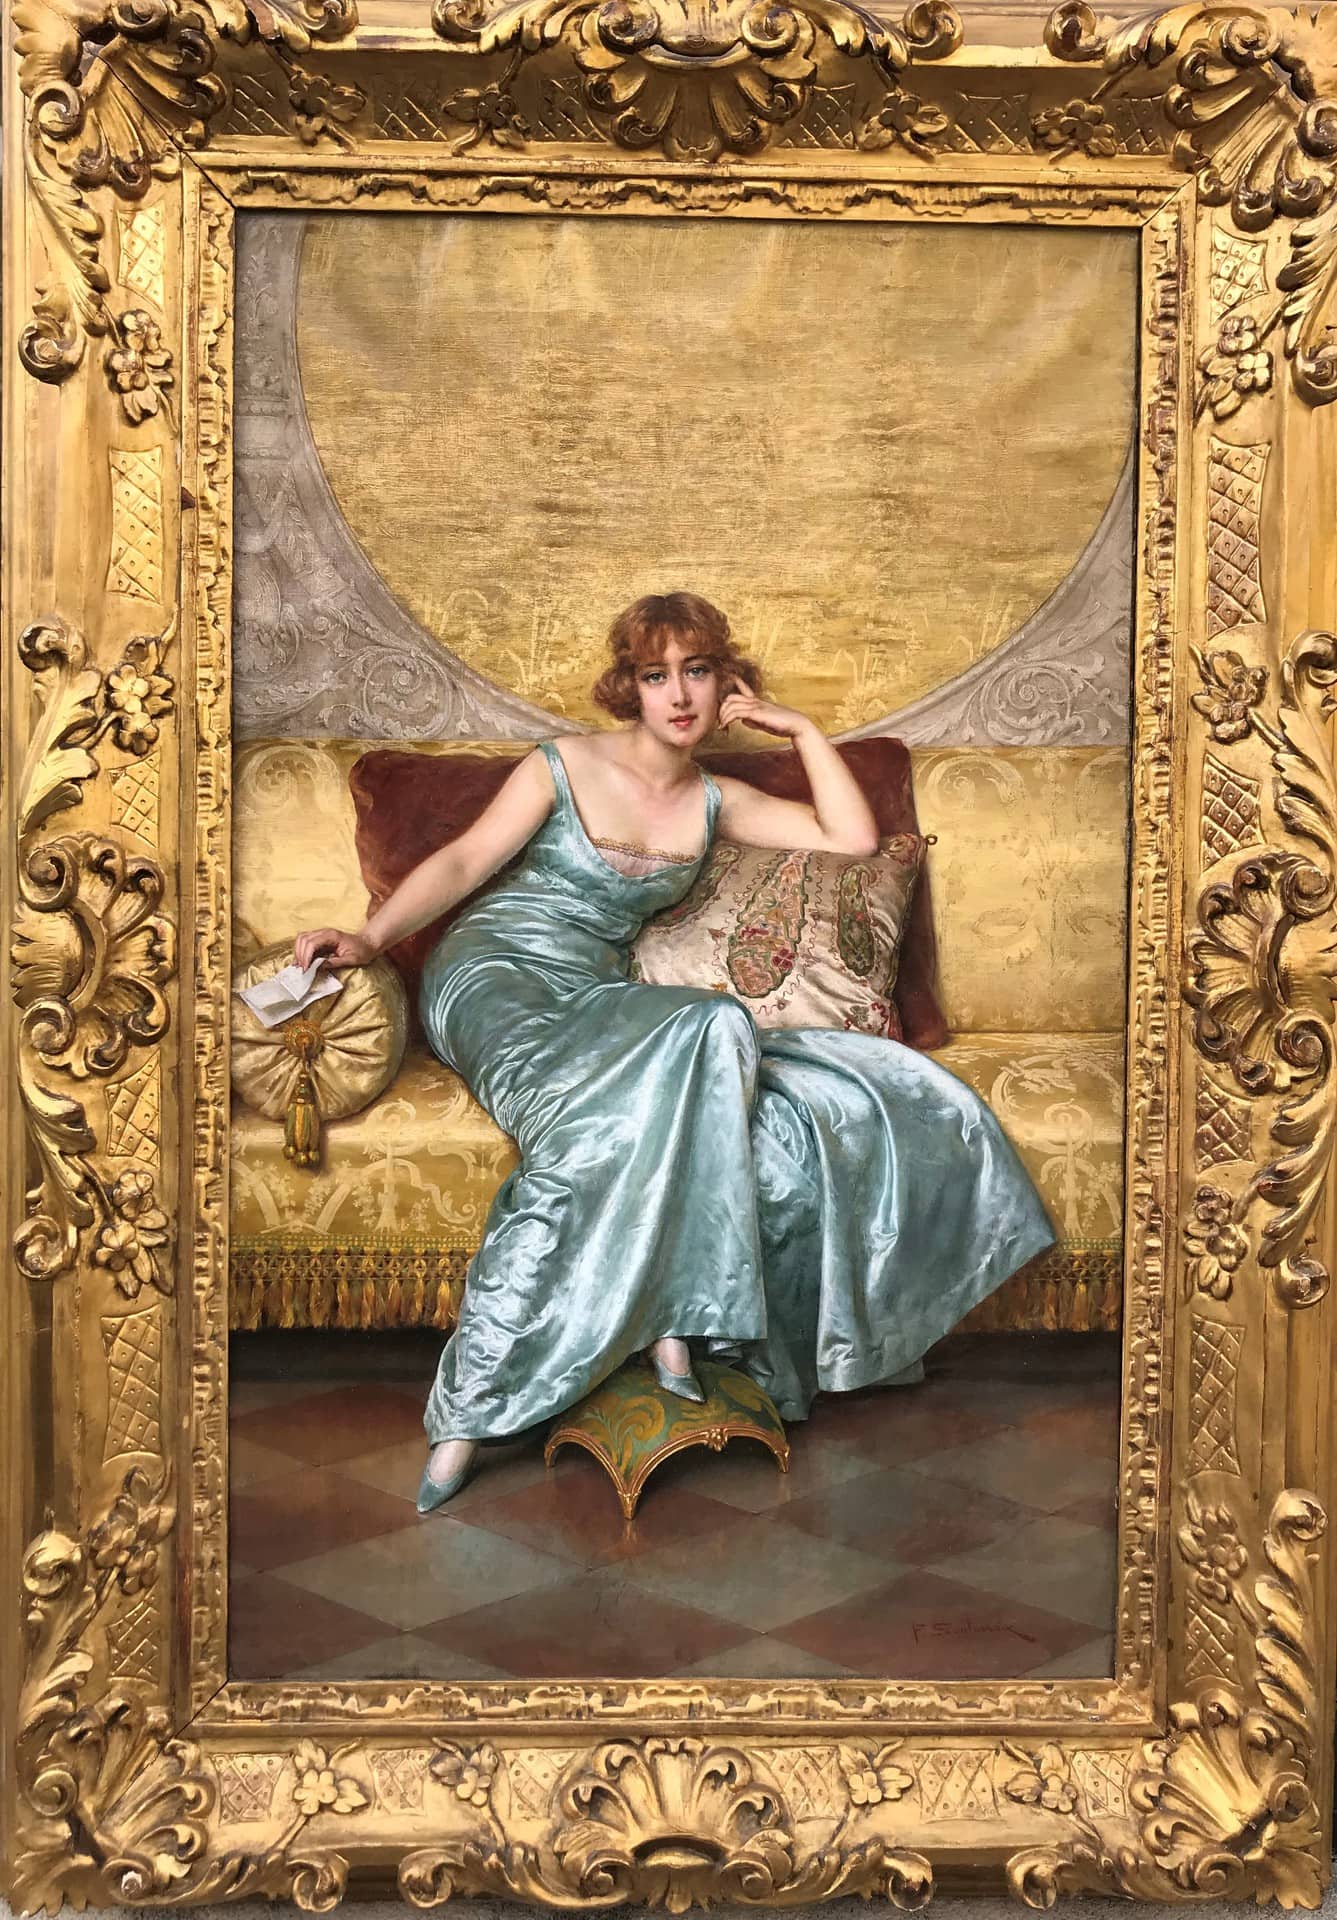 Soulacroix's Portrait of an Elegant Woman, wearing a shimmering light blue dress. She sits on a golden sofa, against a silver and gold wall. Her gaze is somewhat unconcerned, tranquil but distant.